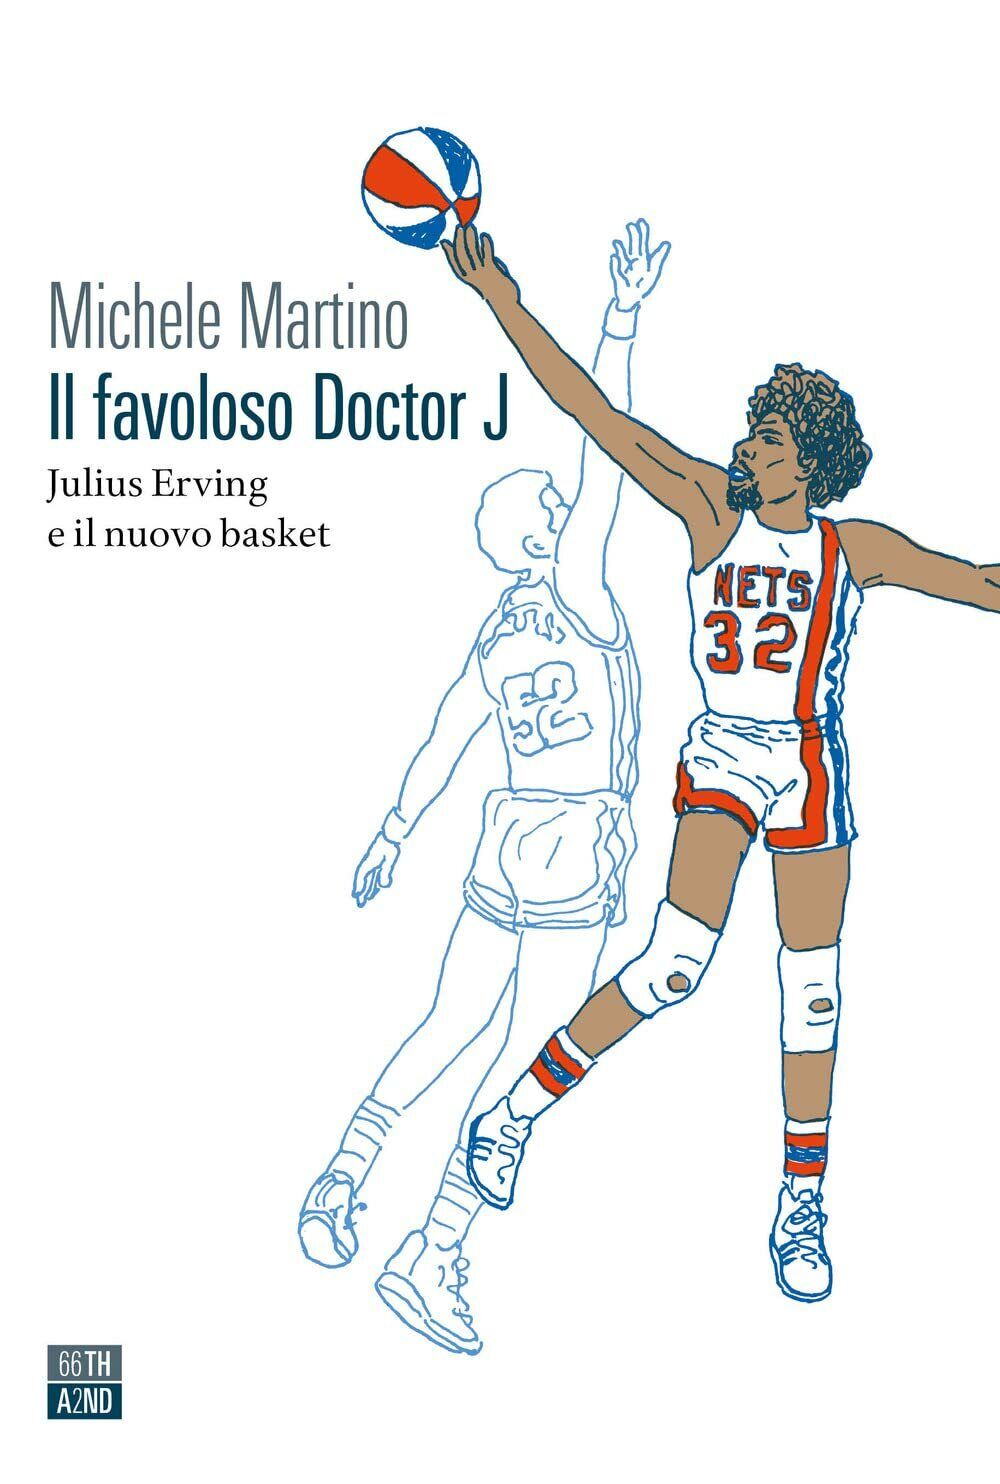 Il favoloso Doctor J. - Michele Martino - 66thand2nd, 2022